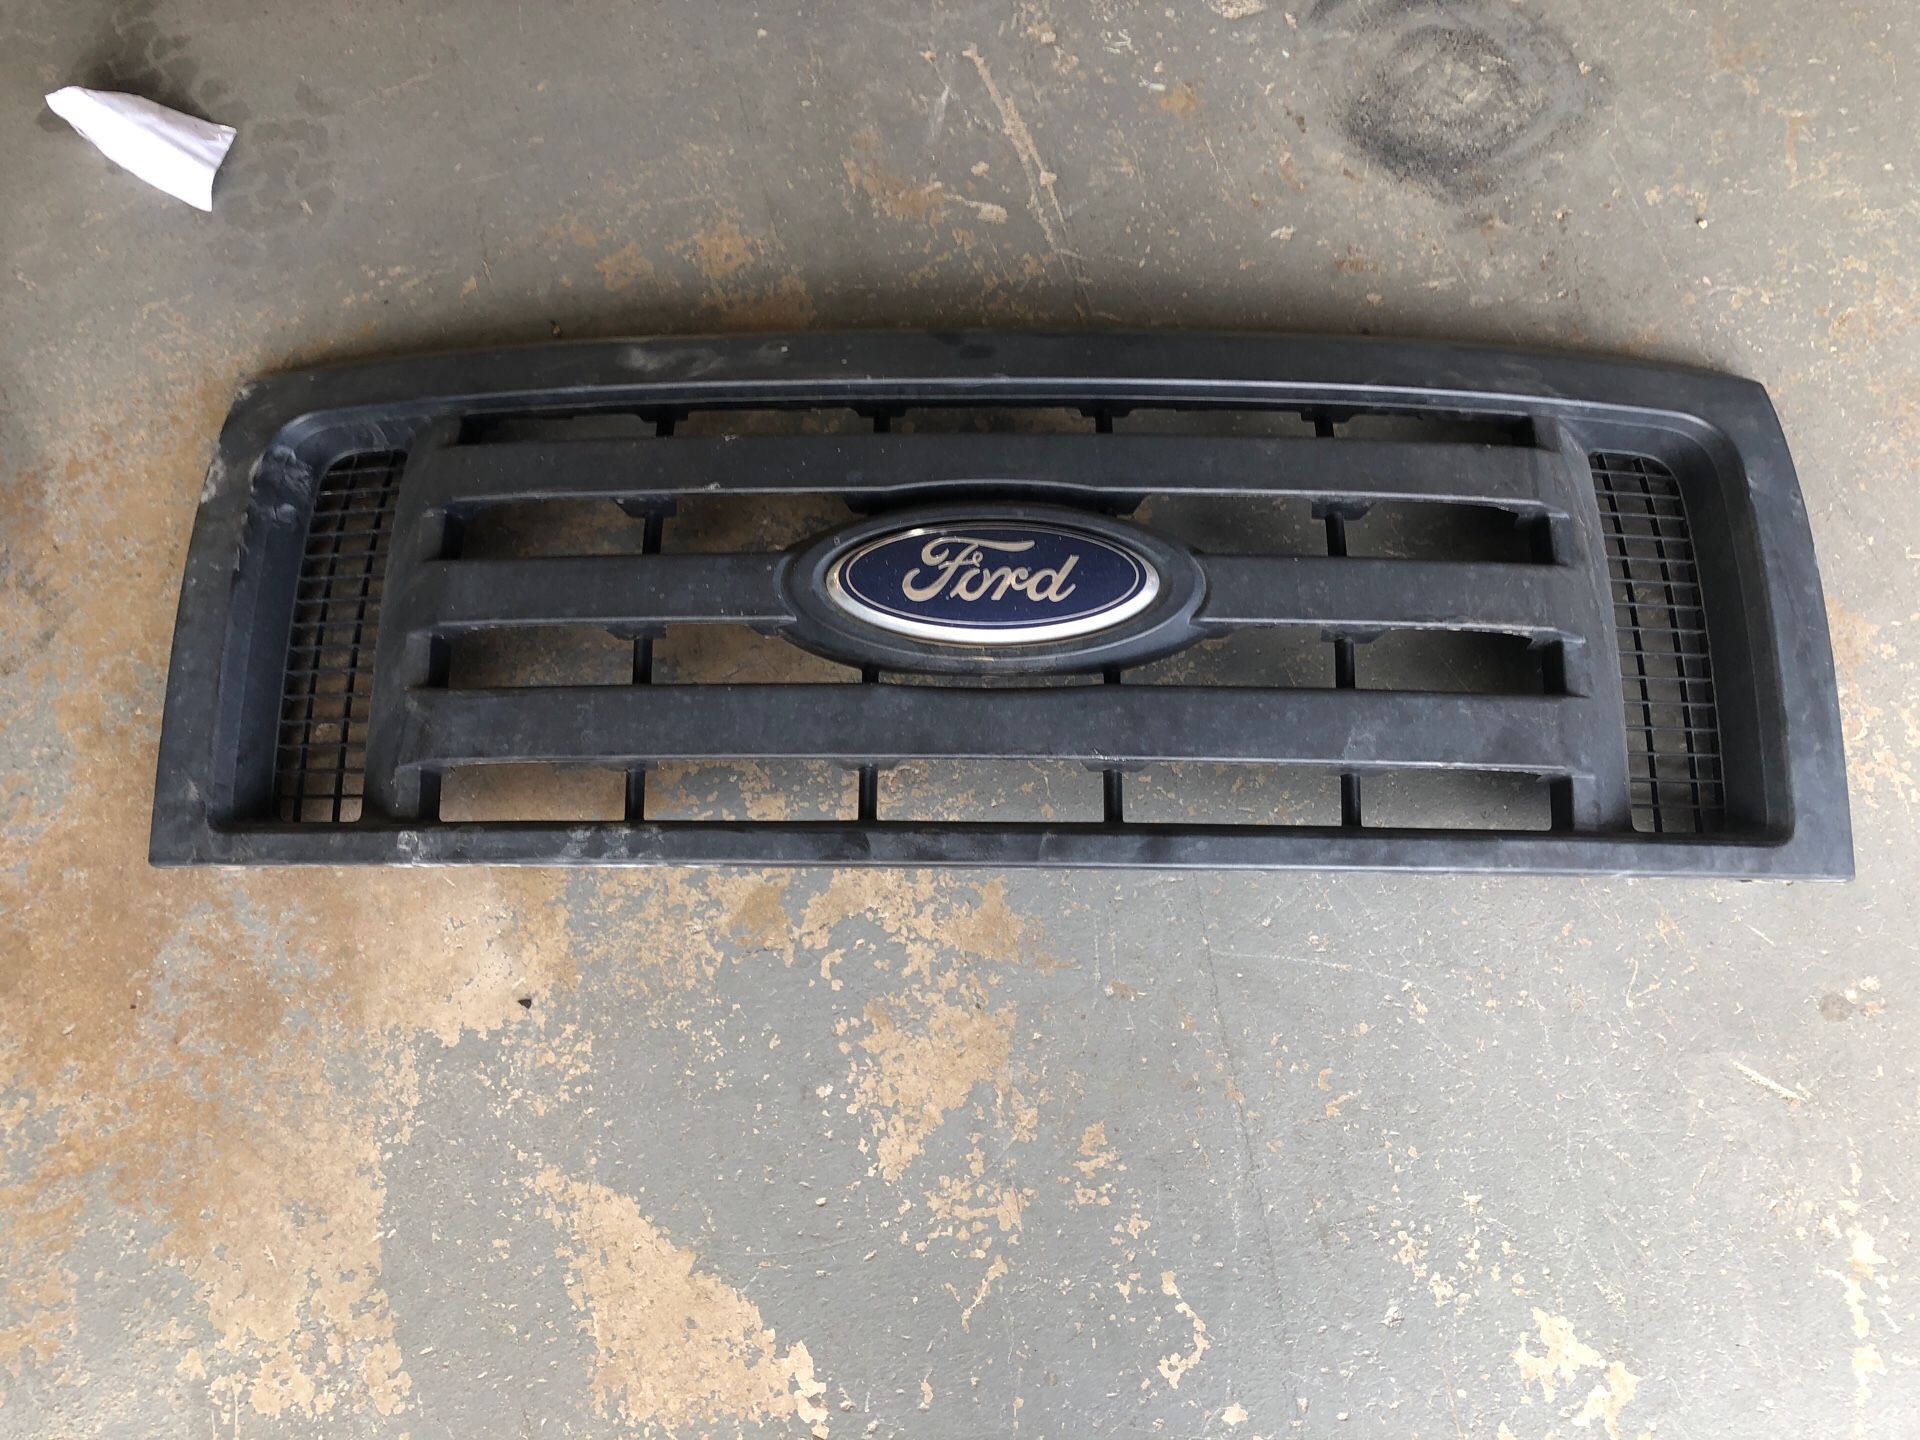 2009 Ford F-150 Truck parts